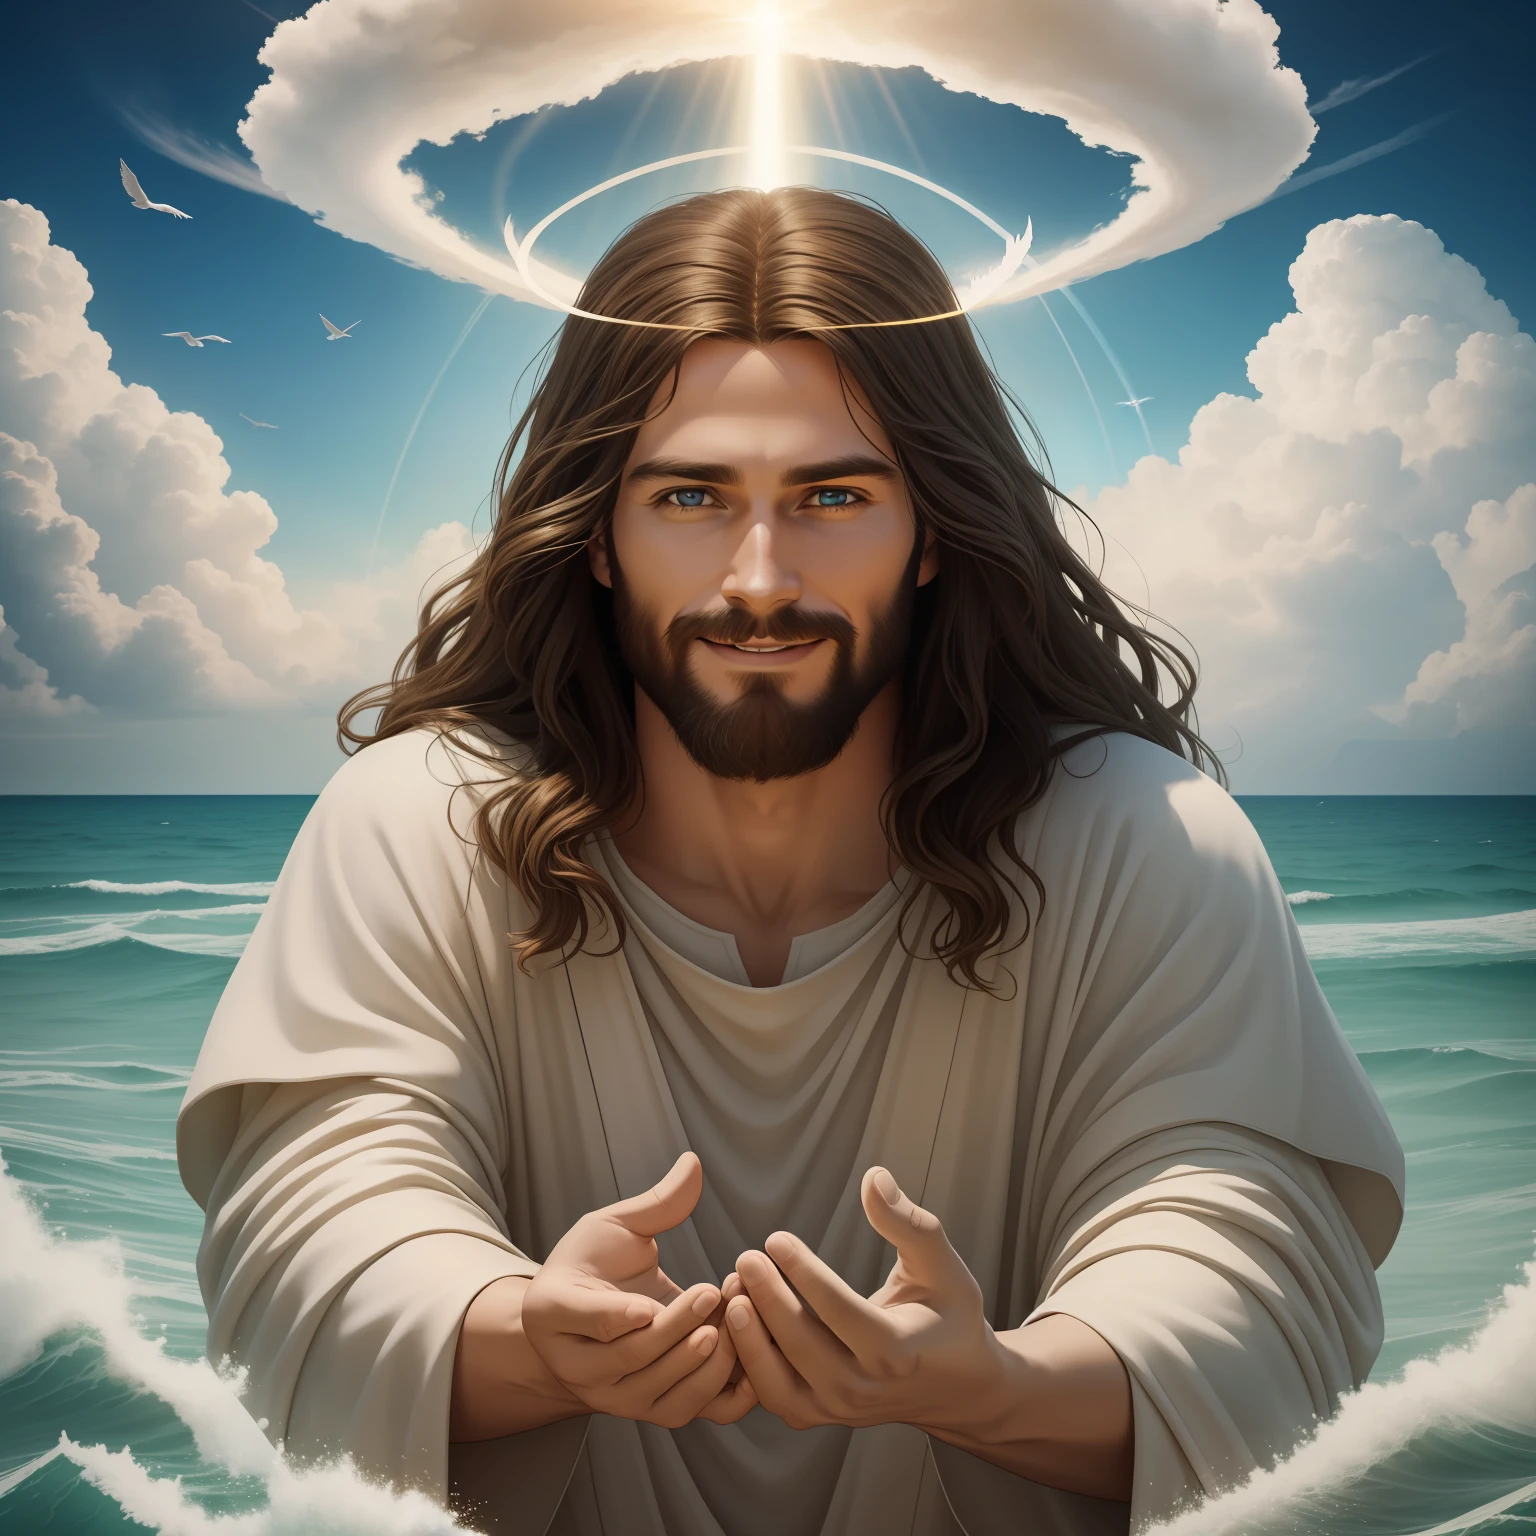 Real Jesus flying on sky with a flying cloud in the background, Jesus walking on water, biblical illustration, epic biblical representation, forcing him to flee, coming out of the ocean, ! holding in hand!, disembarking, god of the ocean, beautiful representation, 8k 3D Model, realistic,
a 3D Realistic of jesus with a halo in the sky, jesus christ, smiling in heaven, portrait of jesus christ, jesus face, 35 young almighty god, portrait of a heavenly god, greg olsen, gigachad jesus, jesus of nazareth, jesus, the face of god, god looking at me, he is greeting you warmly, he is happy, avatar image